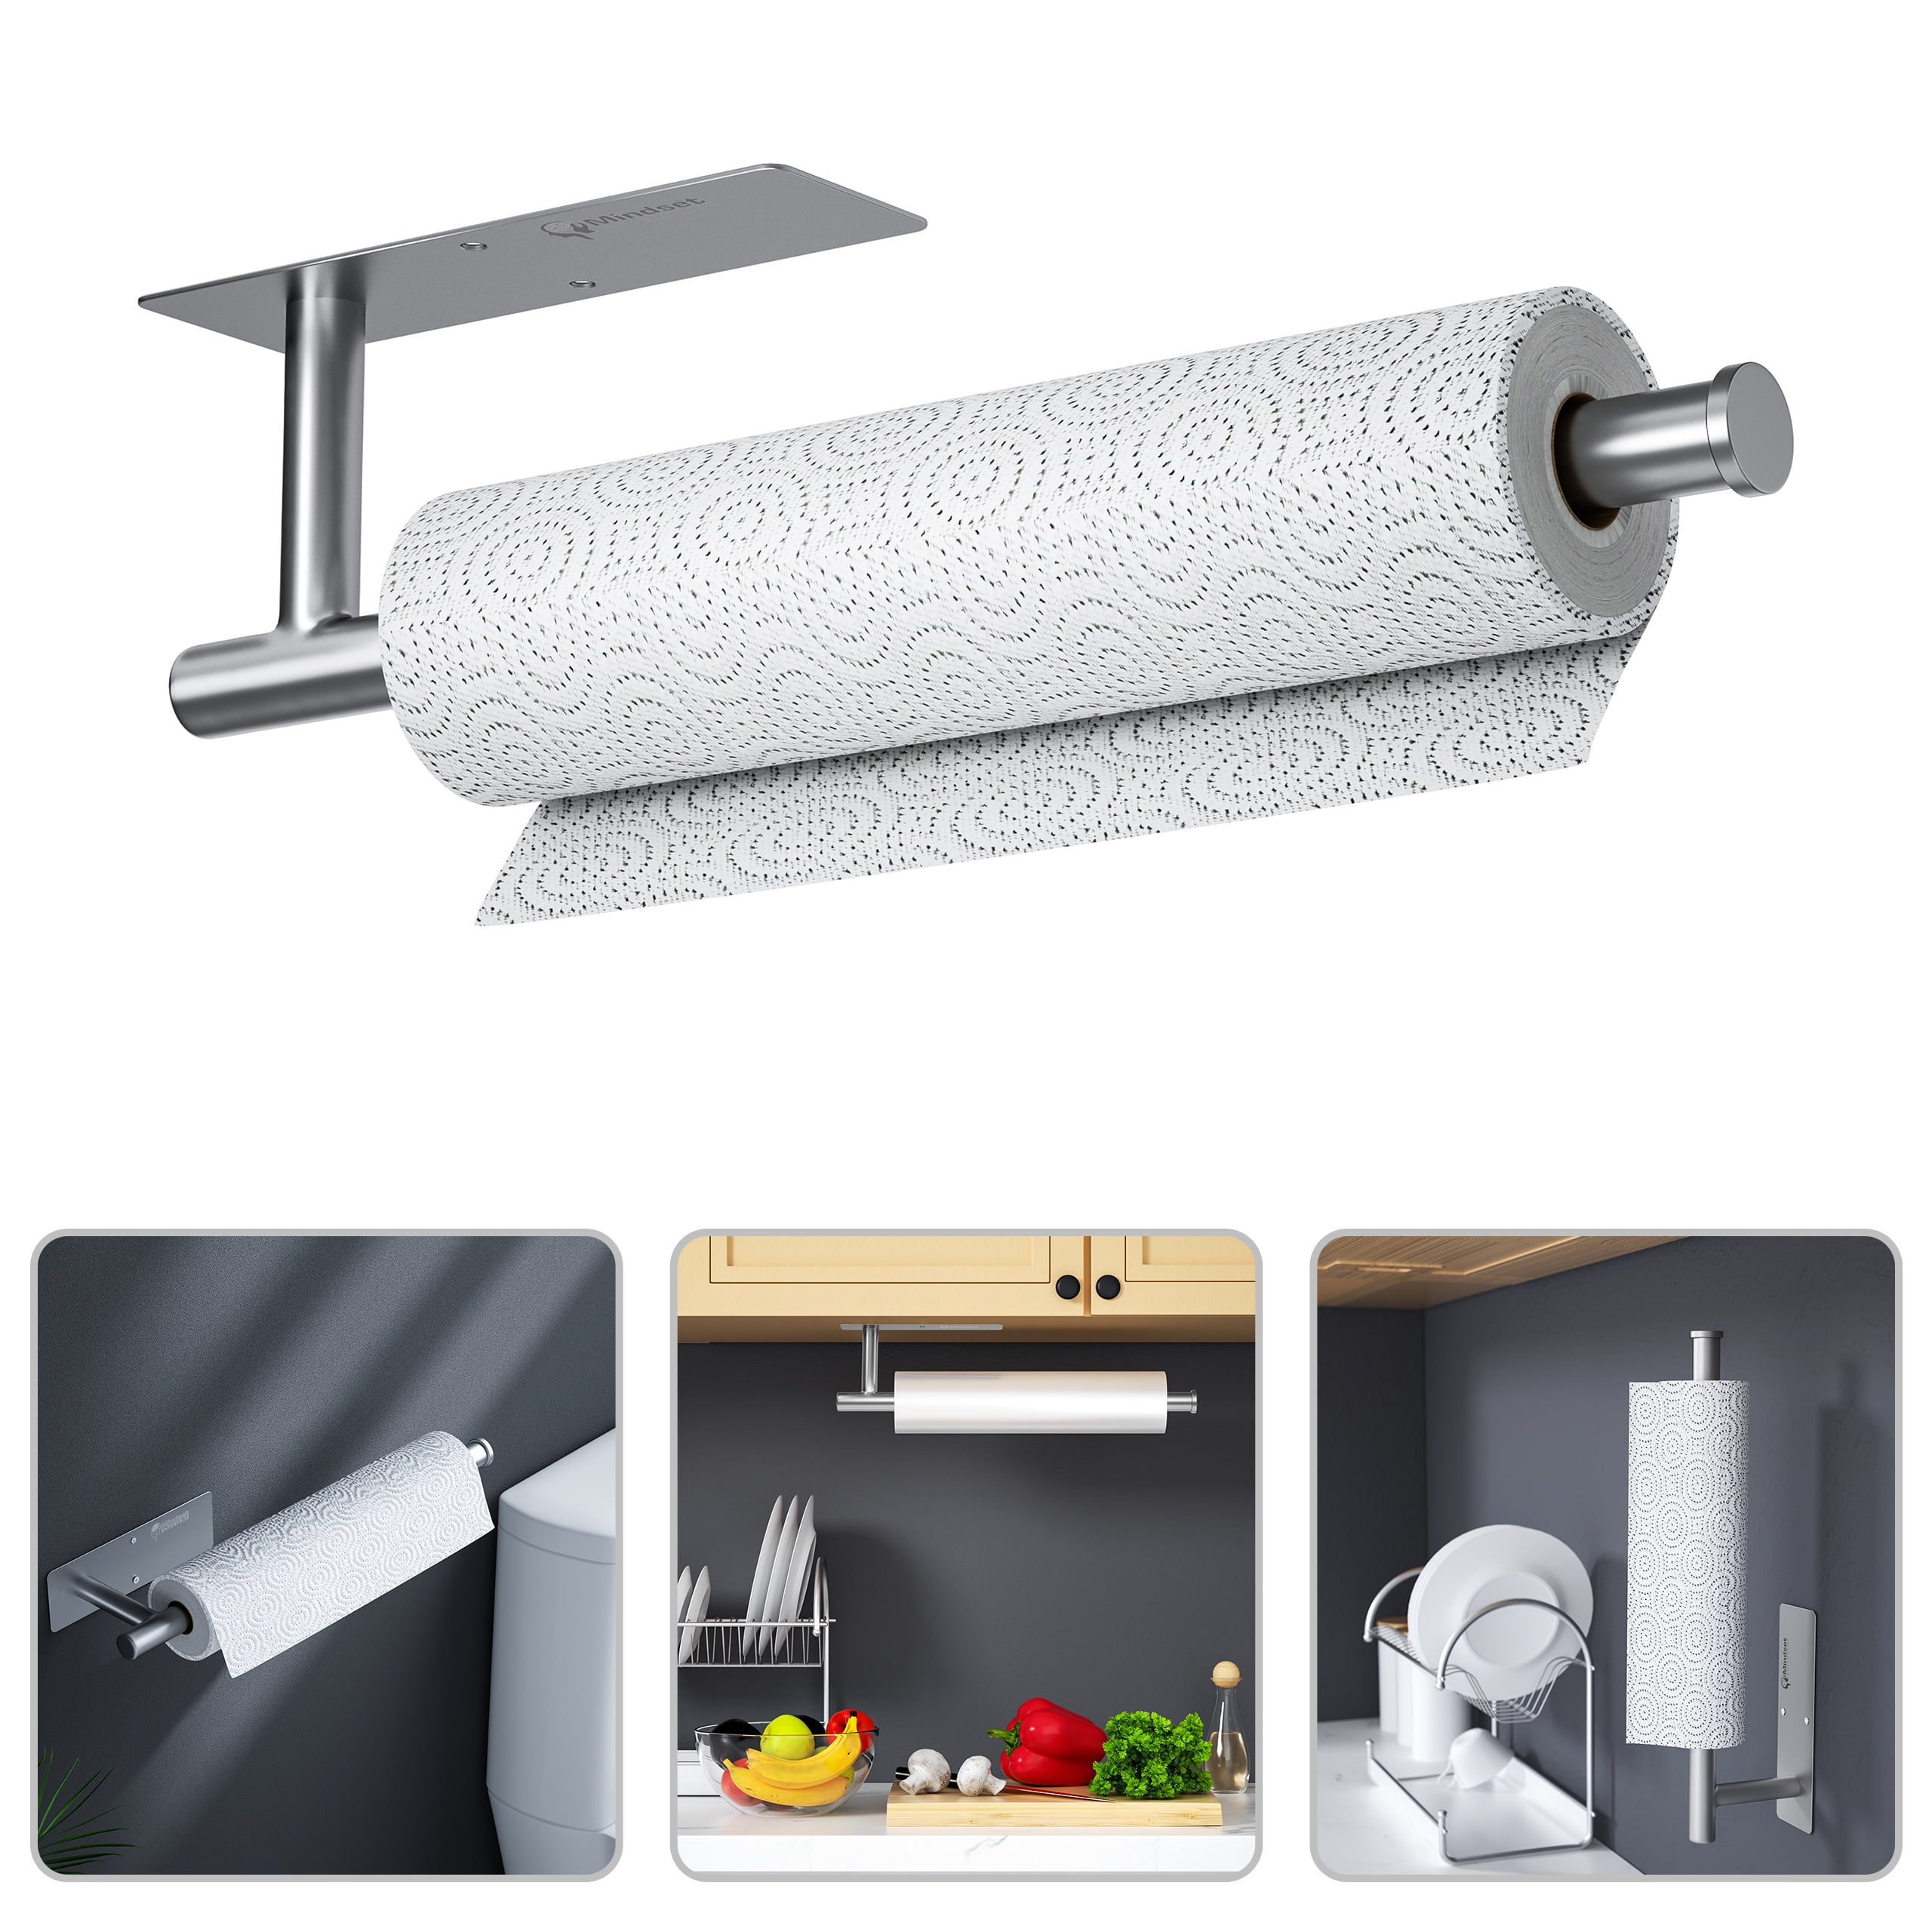 VICSEED 2-in-1 Paper Towel Holder [One-hand Operation Anti-spin] Kitchen  Towel Holder Under Cabinet [Versatile Rotatable] Paper Roll Holder Wall  Mount for Kitchen Bathroom Toilet RVs (Adhesive, Screw)